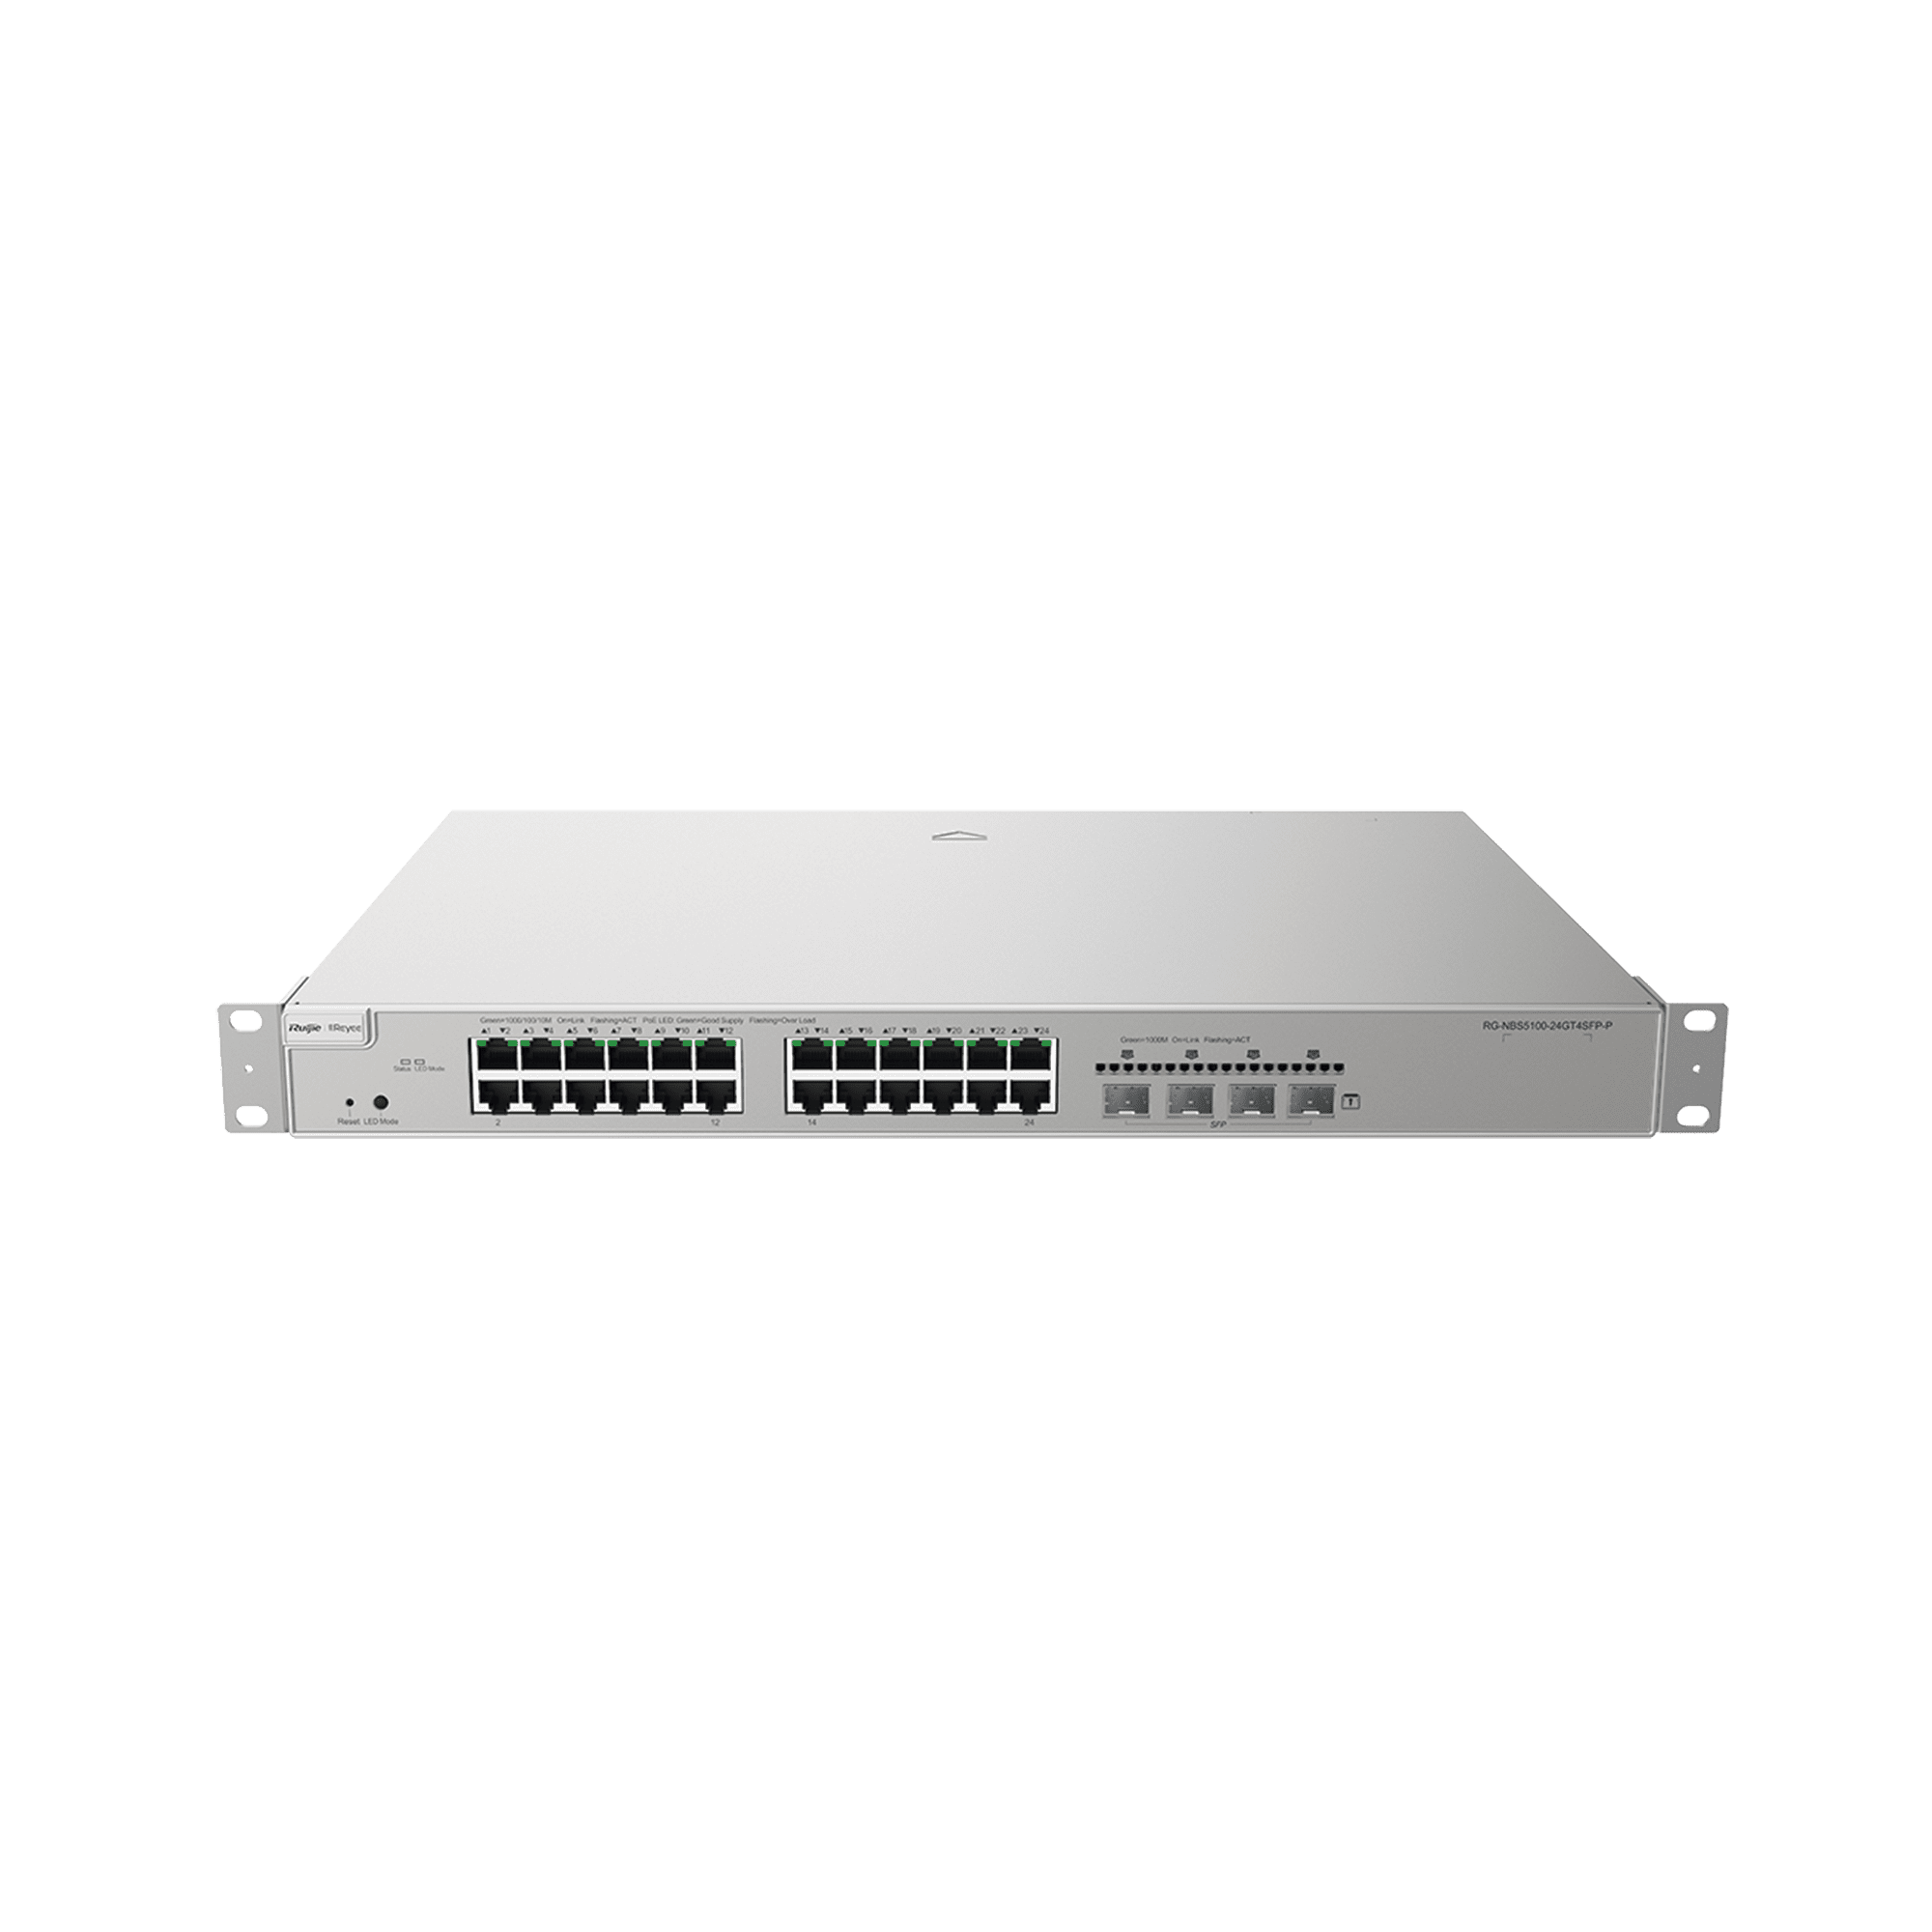 Switch Administrable Capa 3 con 24 puertos Gigabit PoE 802.3af/at